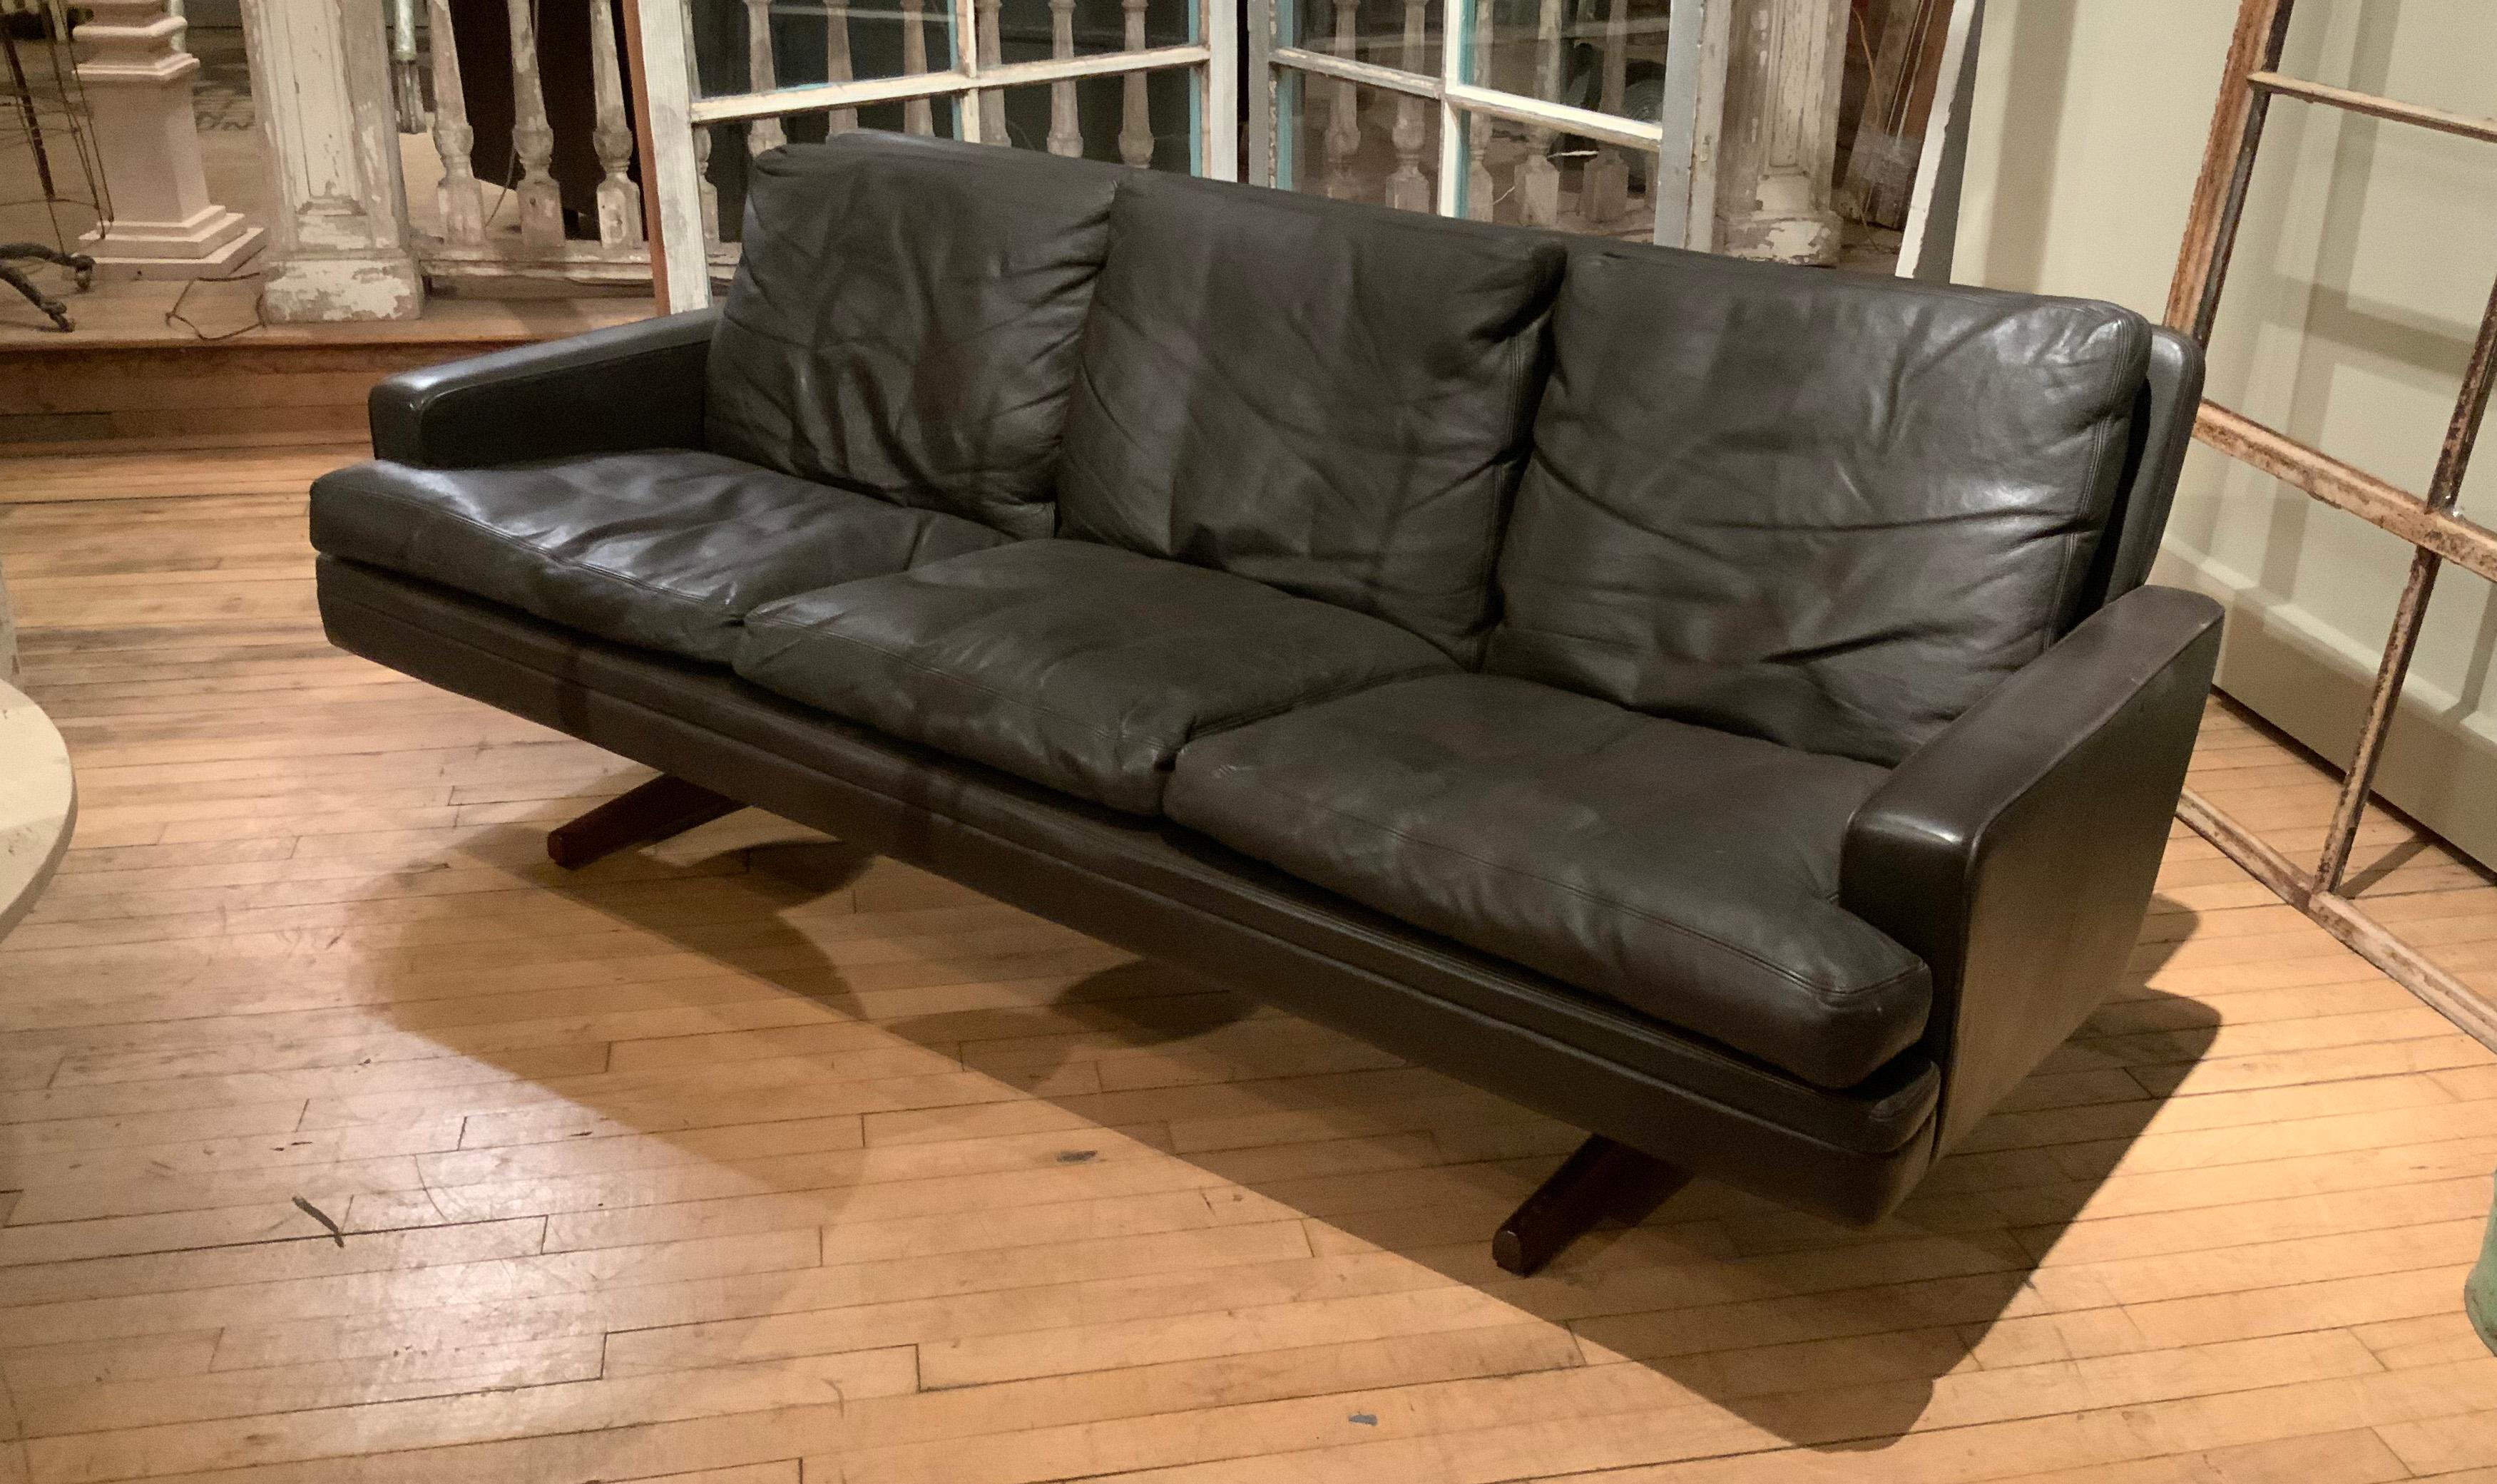 A 1960s three-seat sofa in dark brown leather and rosewood by Fredrik Kayser made by Vatne Mobler. Beautiful design and original leather with wonderful patina and down cushions.